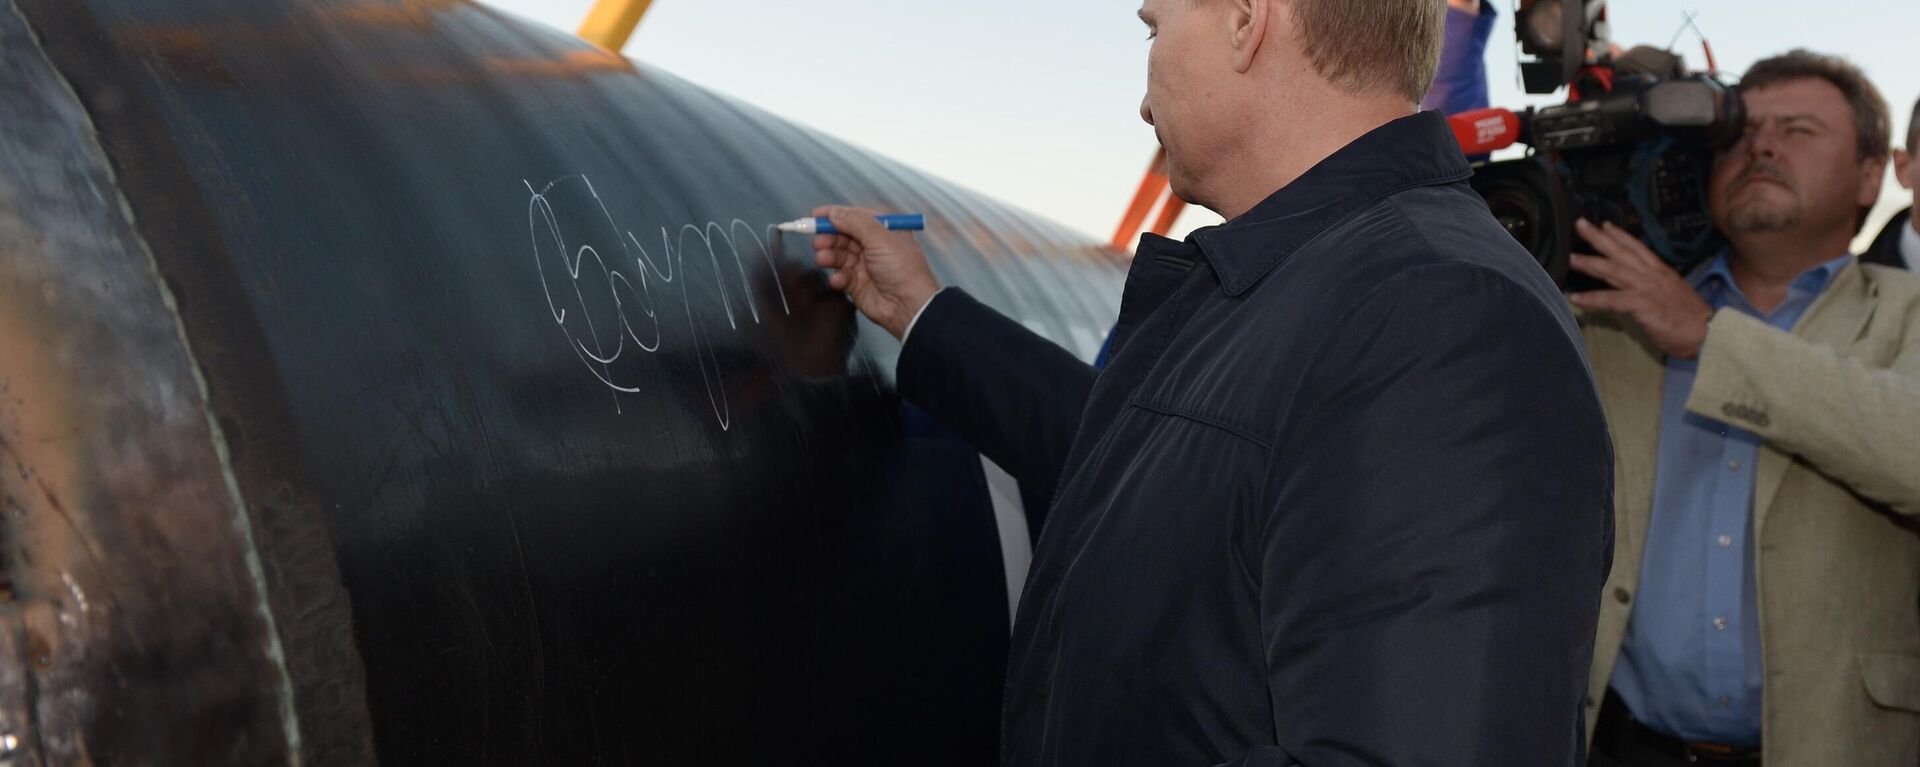 Russian President Vladimir Putin signs a section of the Power of Siberia pipeline during its construction, September 2014. - Sputnik International, 1920, 12.09.2023